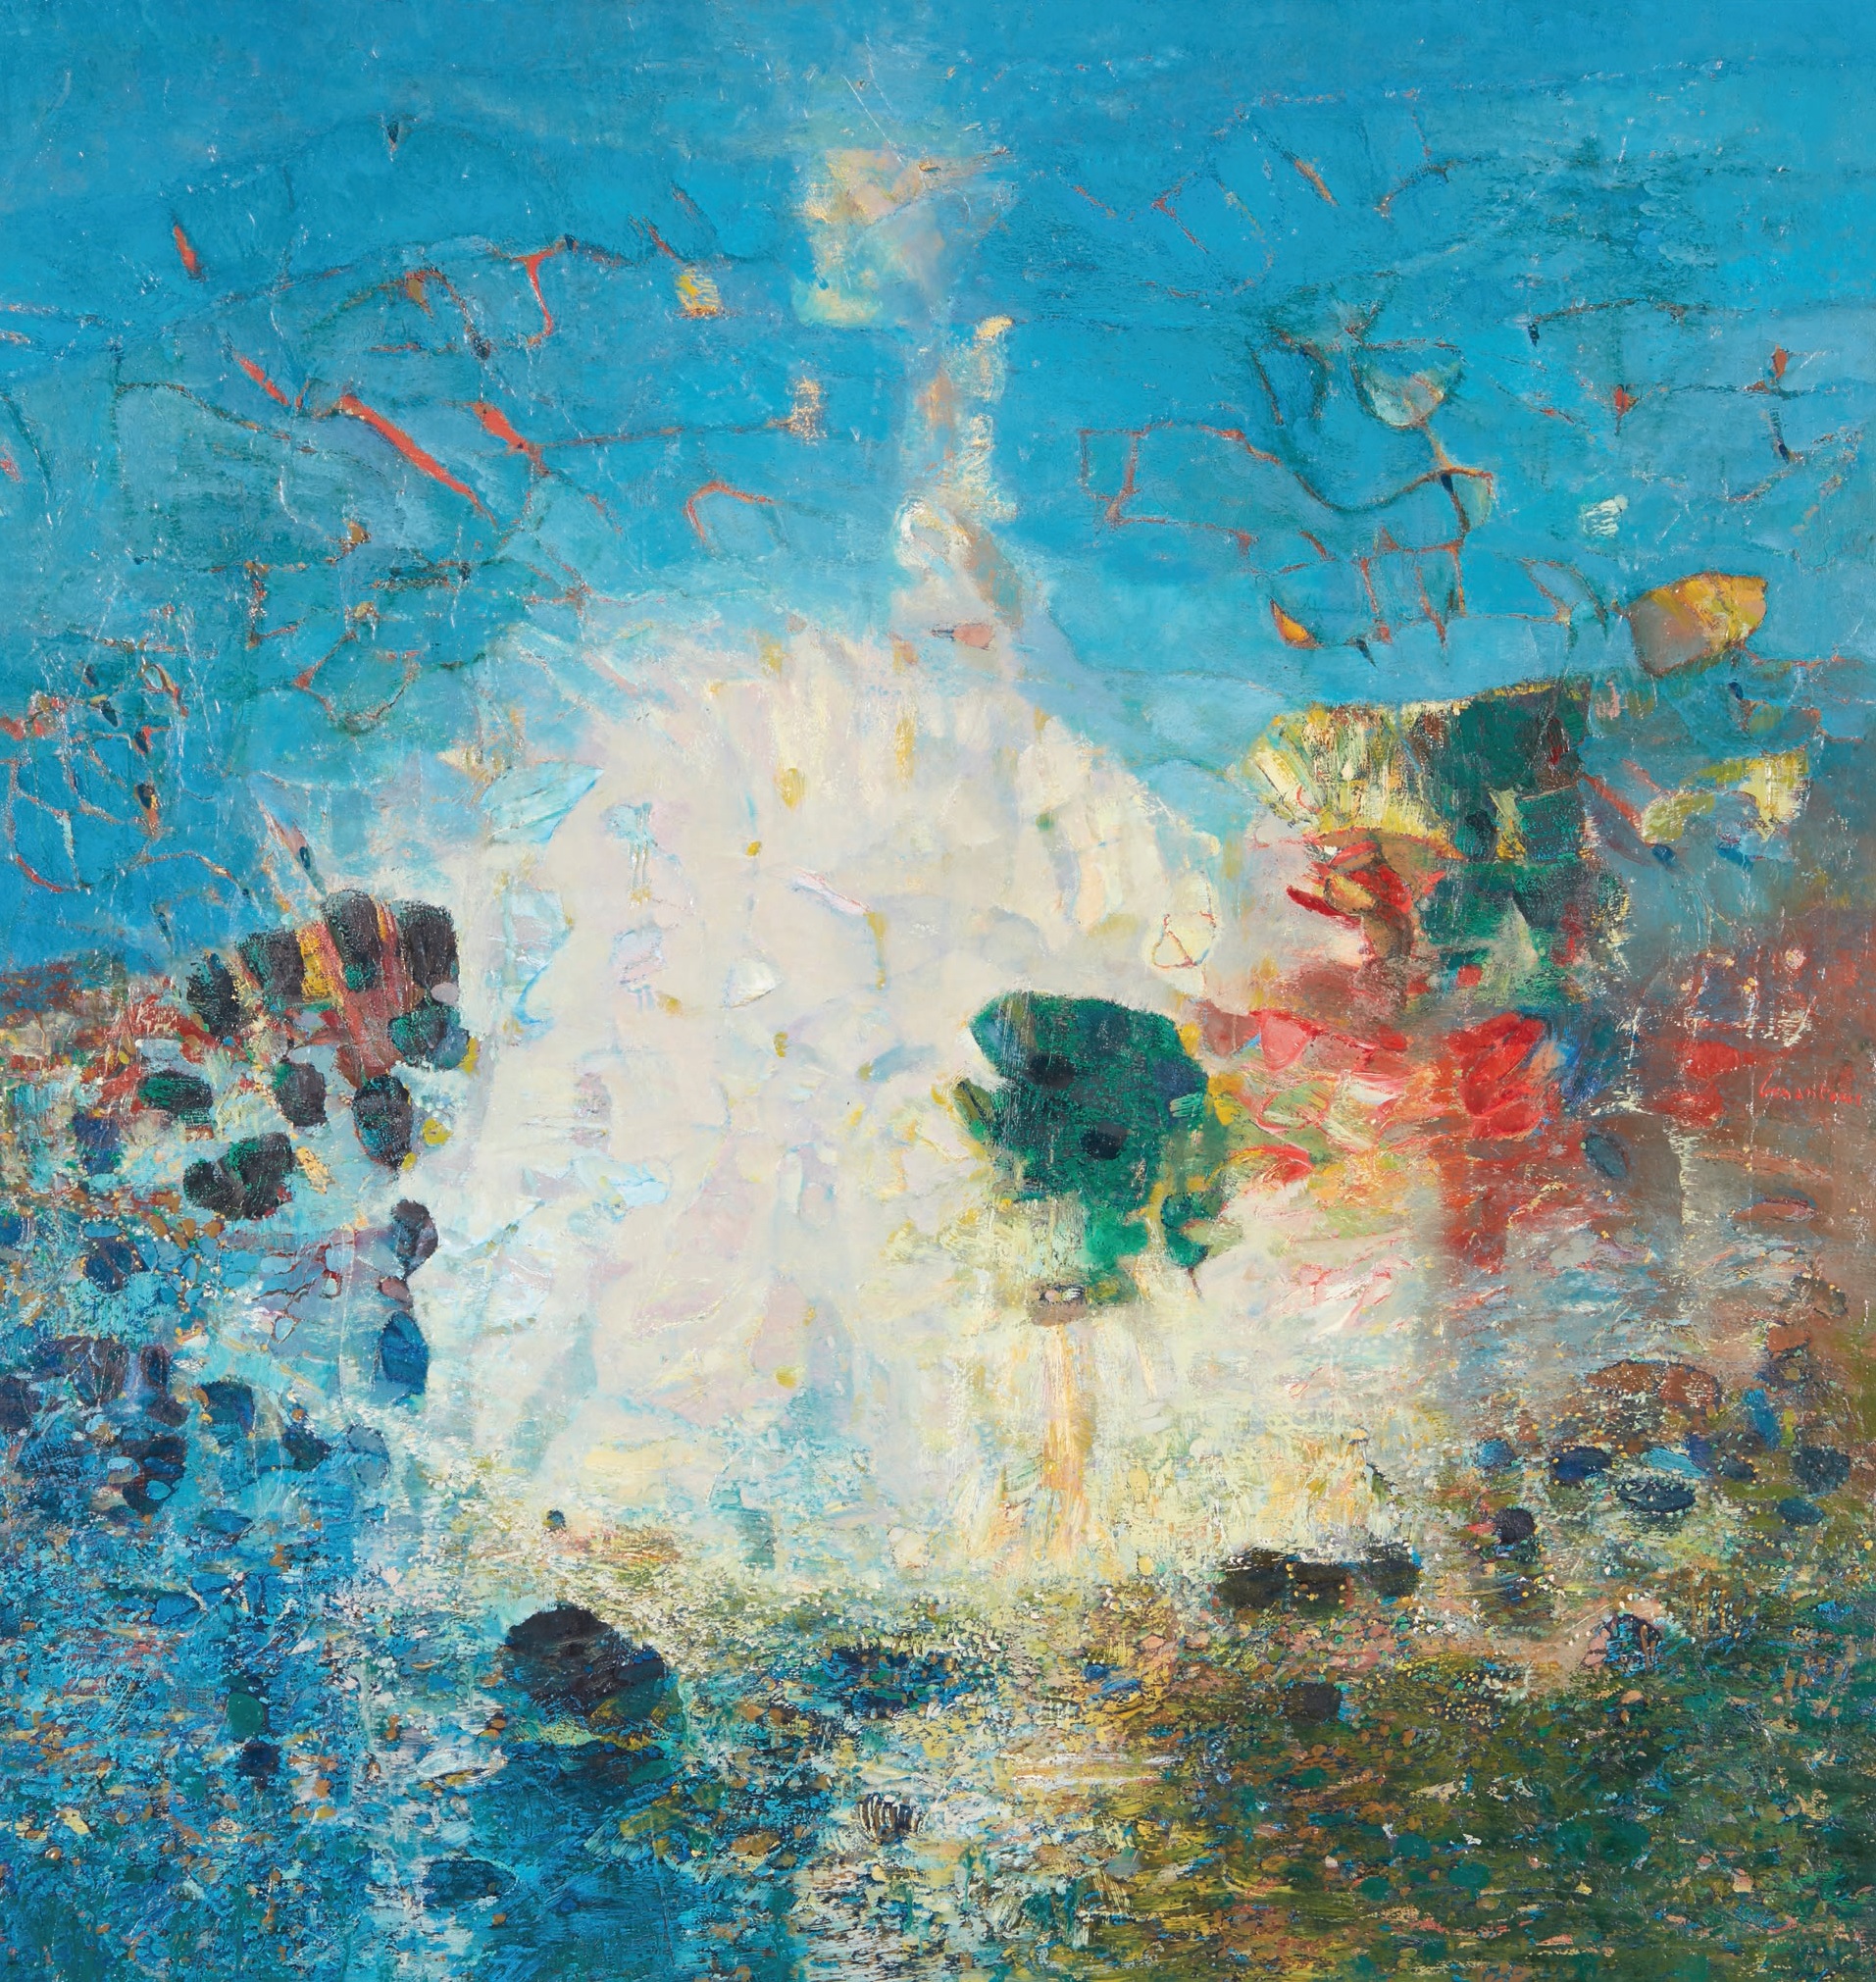 Abdallah Benanteur (Algeria), “To Monet, Giverny” (1983, oil on canvas), 47 ¼ inches by 47 ¼ inches, collection of the Barjeel Art Foundation, Sharjah, UAE